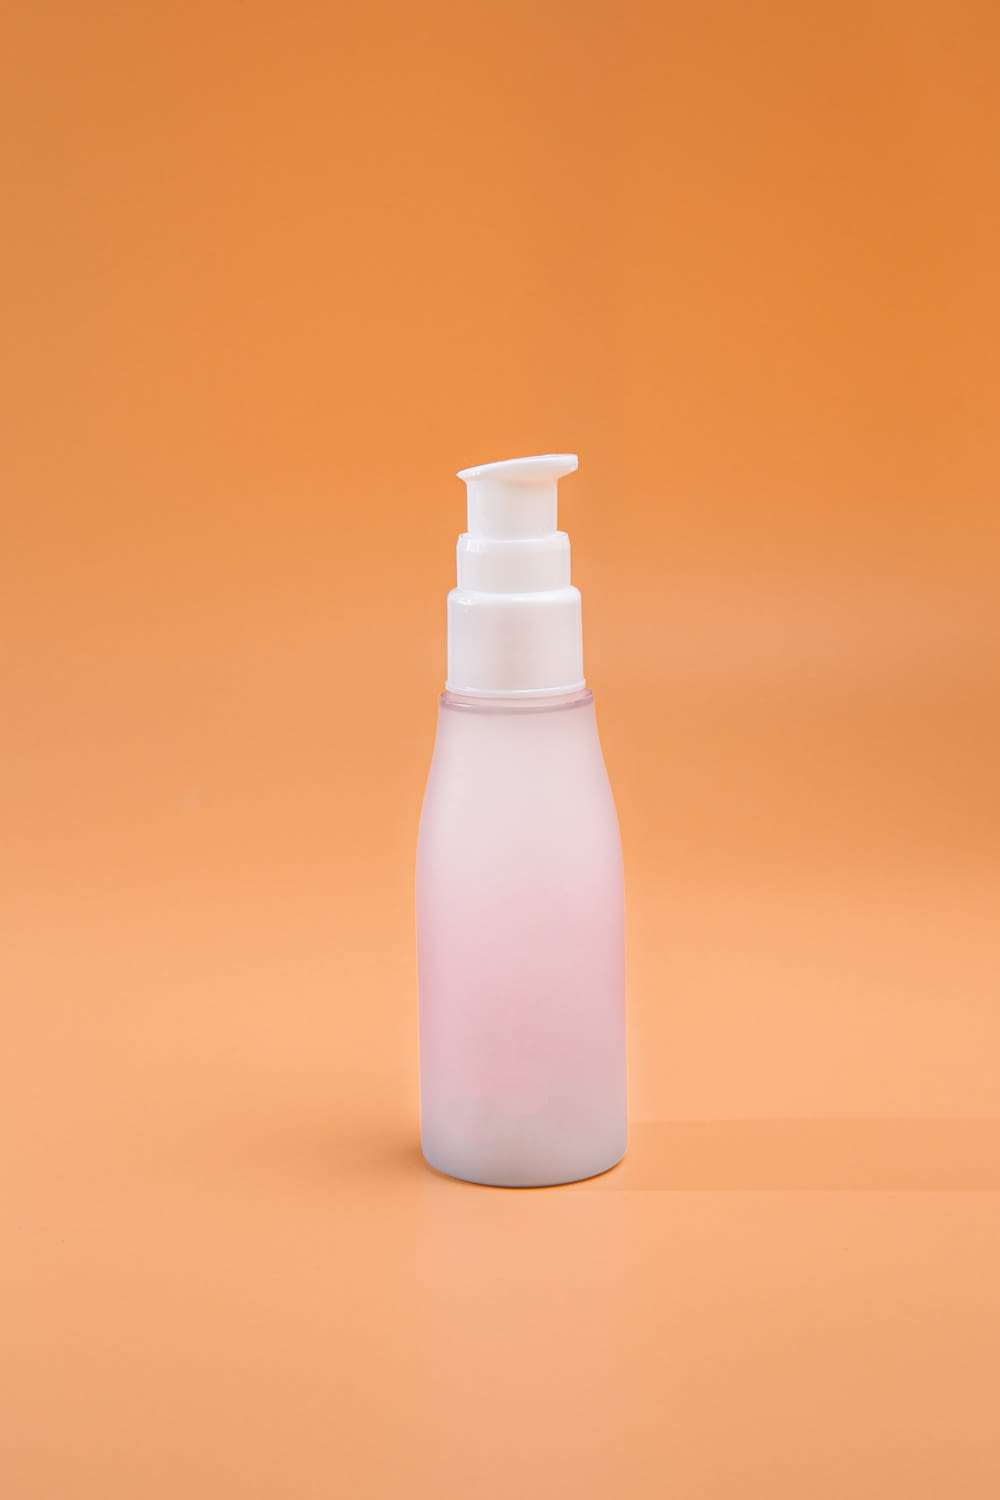 a bottle of lotion on an orange background